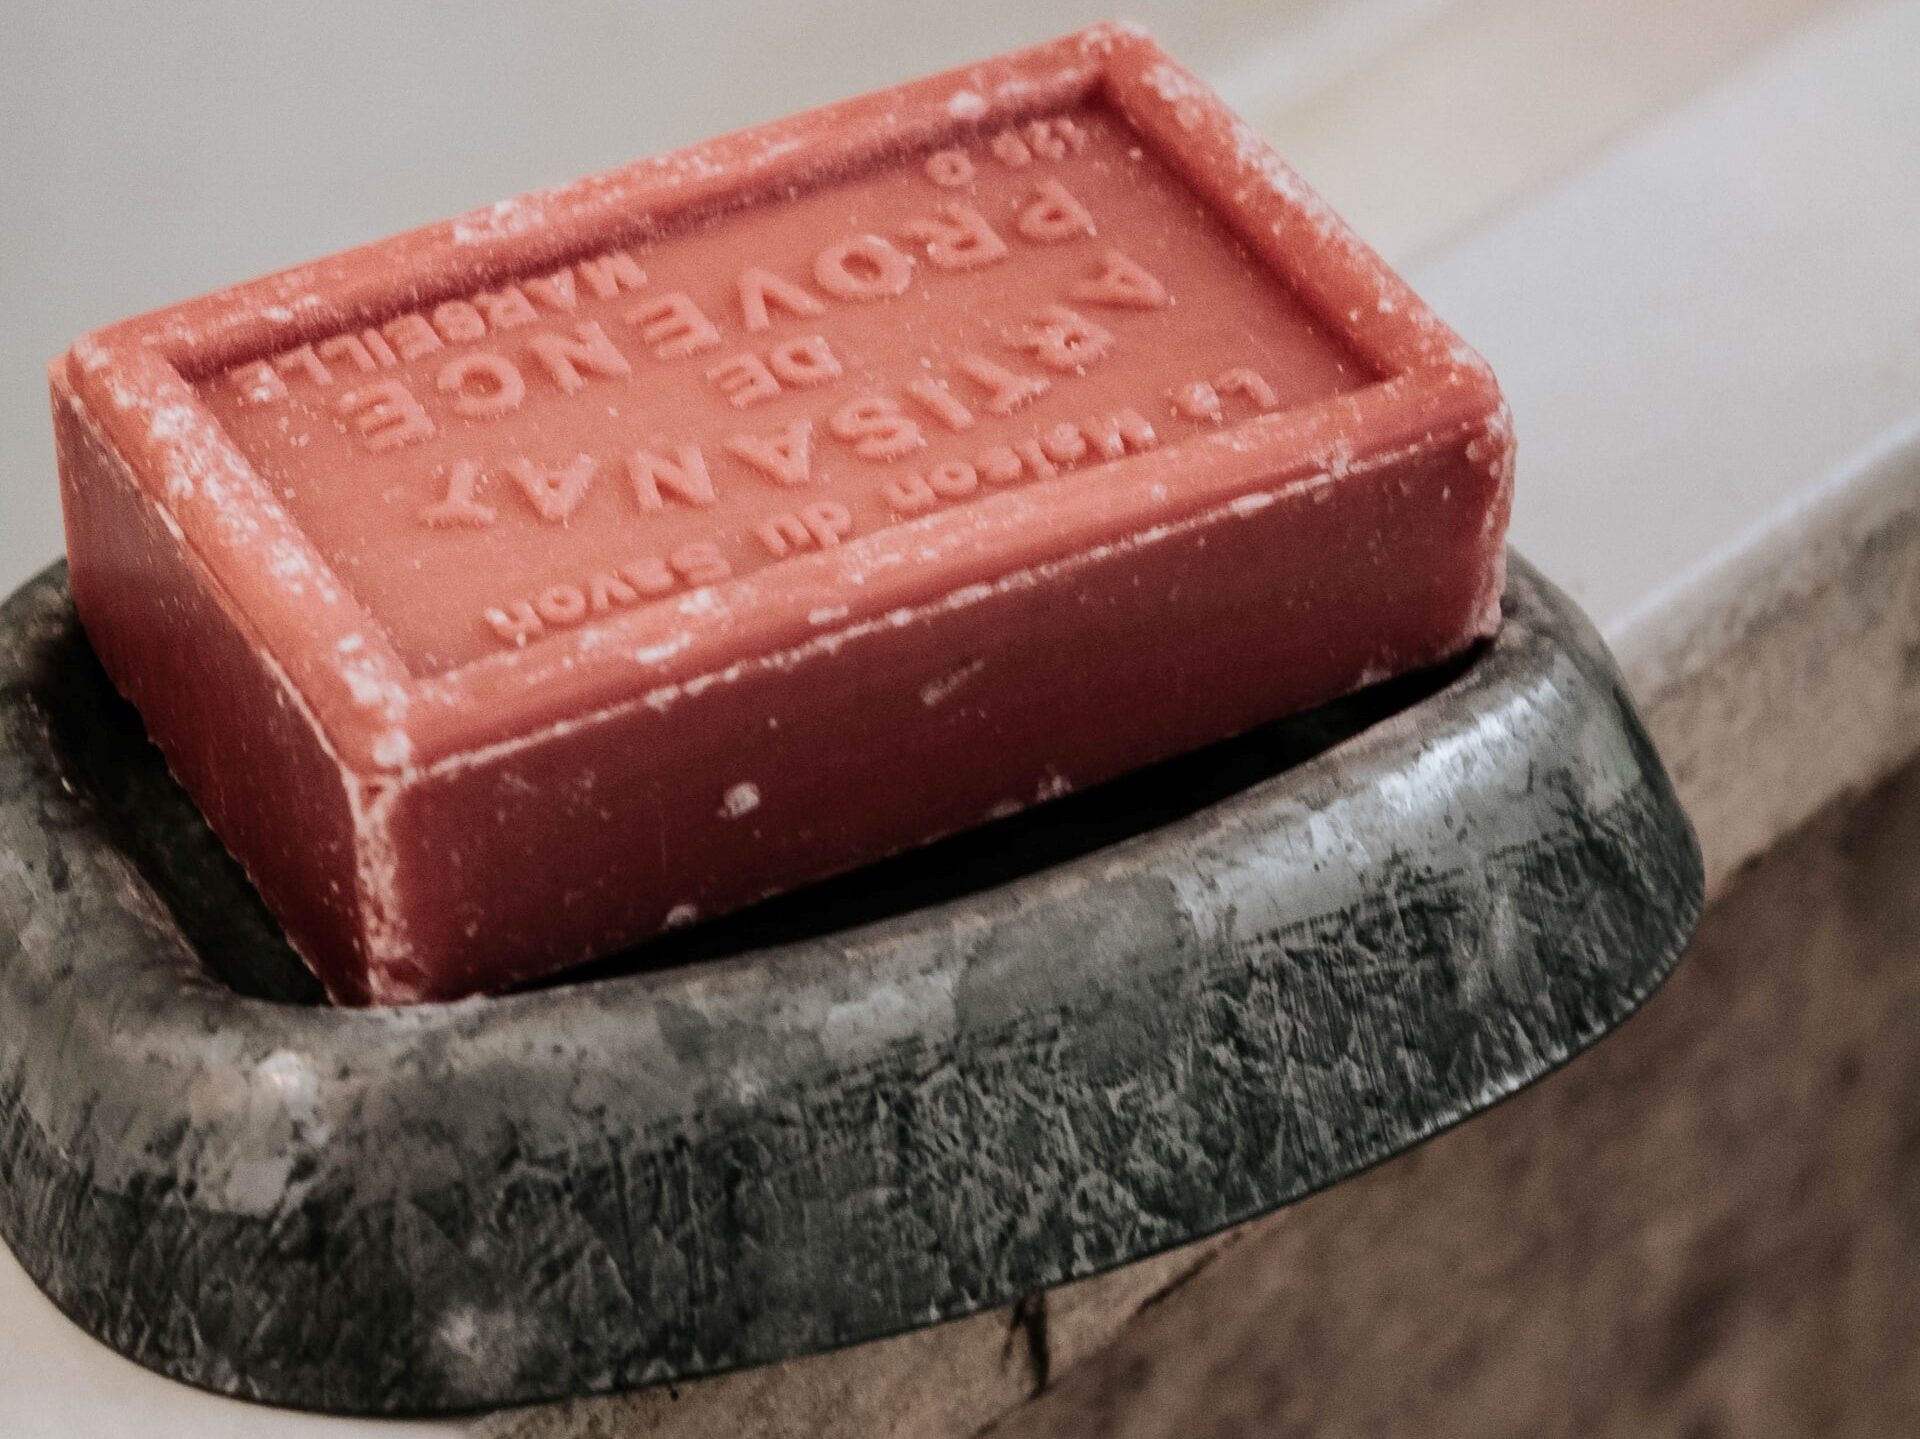 a red bar of soap in a soap dish on the edge of the tub for your minimalist shower caddy